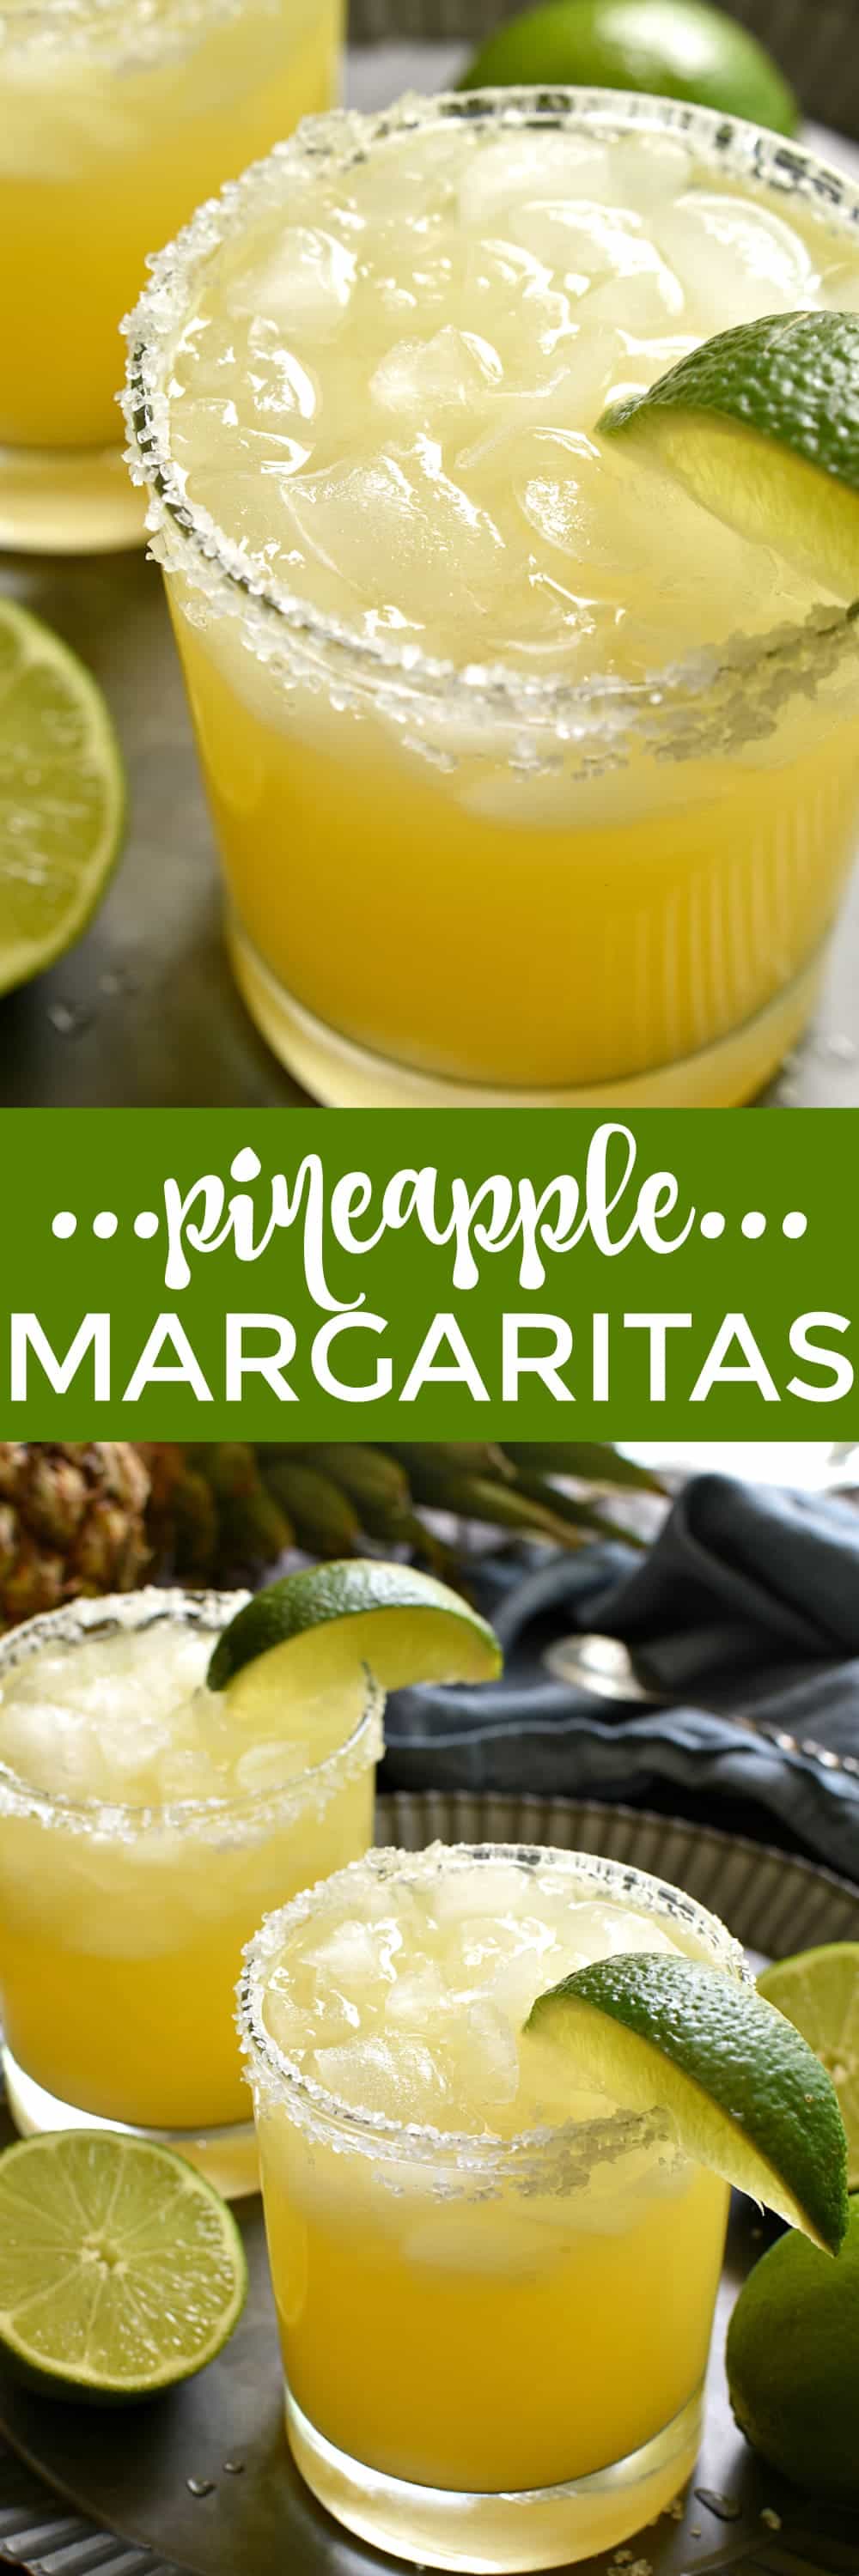 These Pineapple Margaritas are a deliciously sweet, refreshing twist on the original! Made with just 4 simple ingredients and perfect for happy hour, weekends, and all summer long!